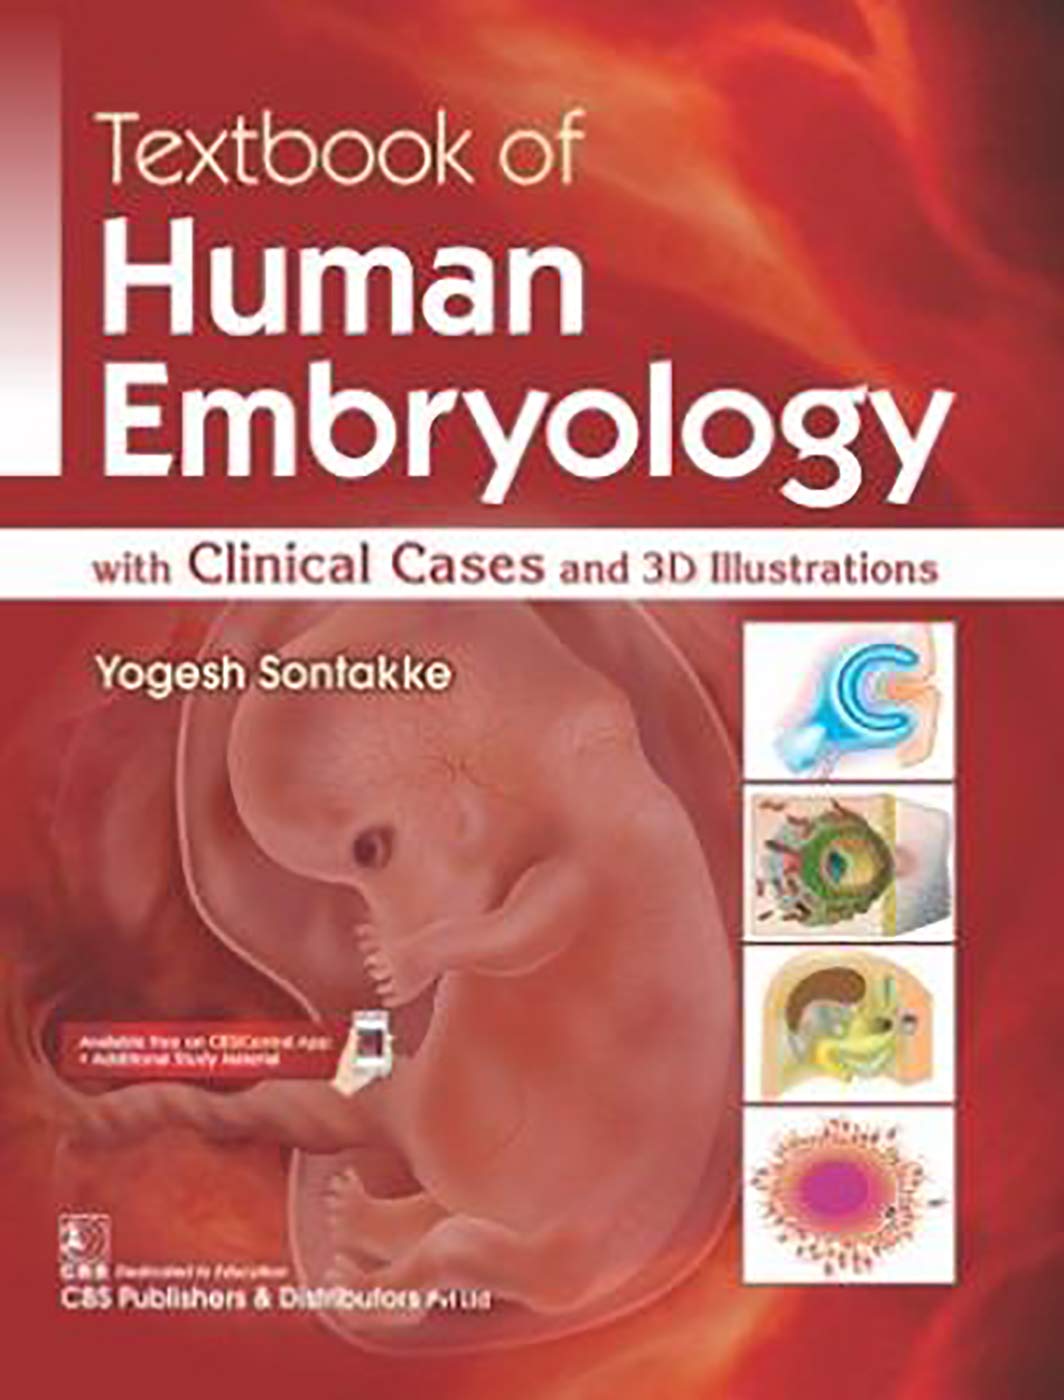 textbook-of-human-embryology-with-clinical-cases-and-3d-illustrations